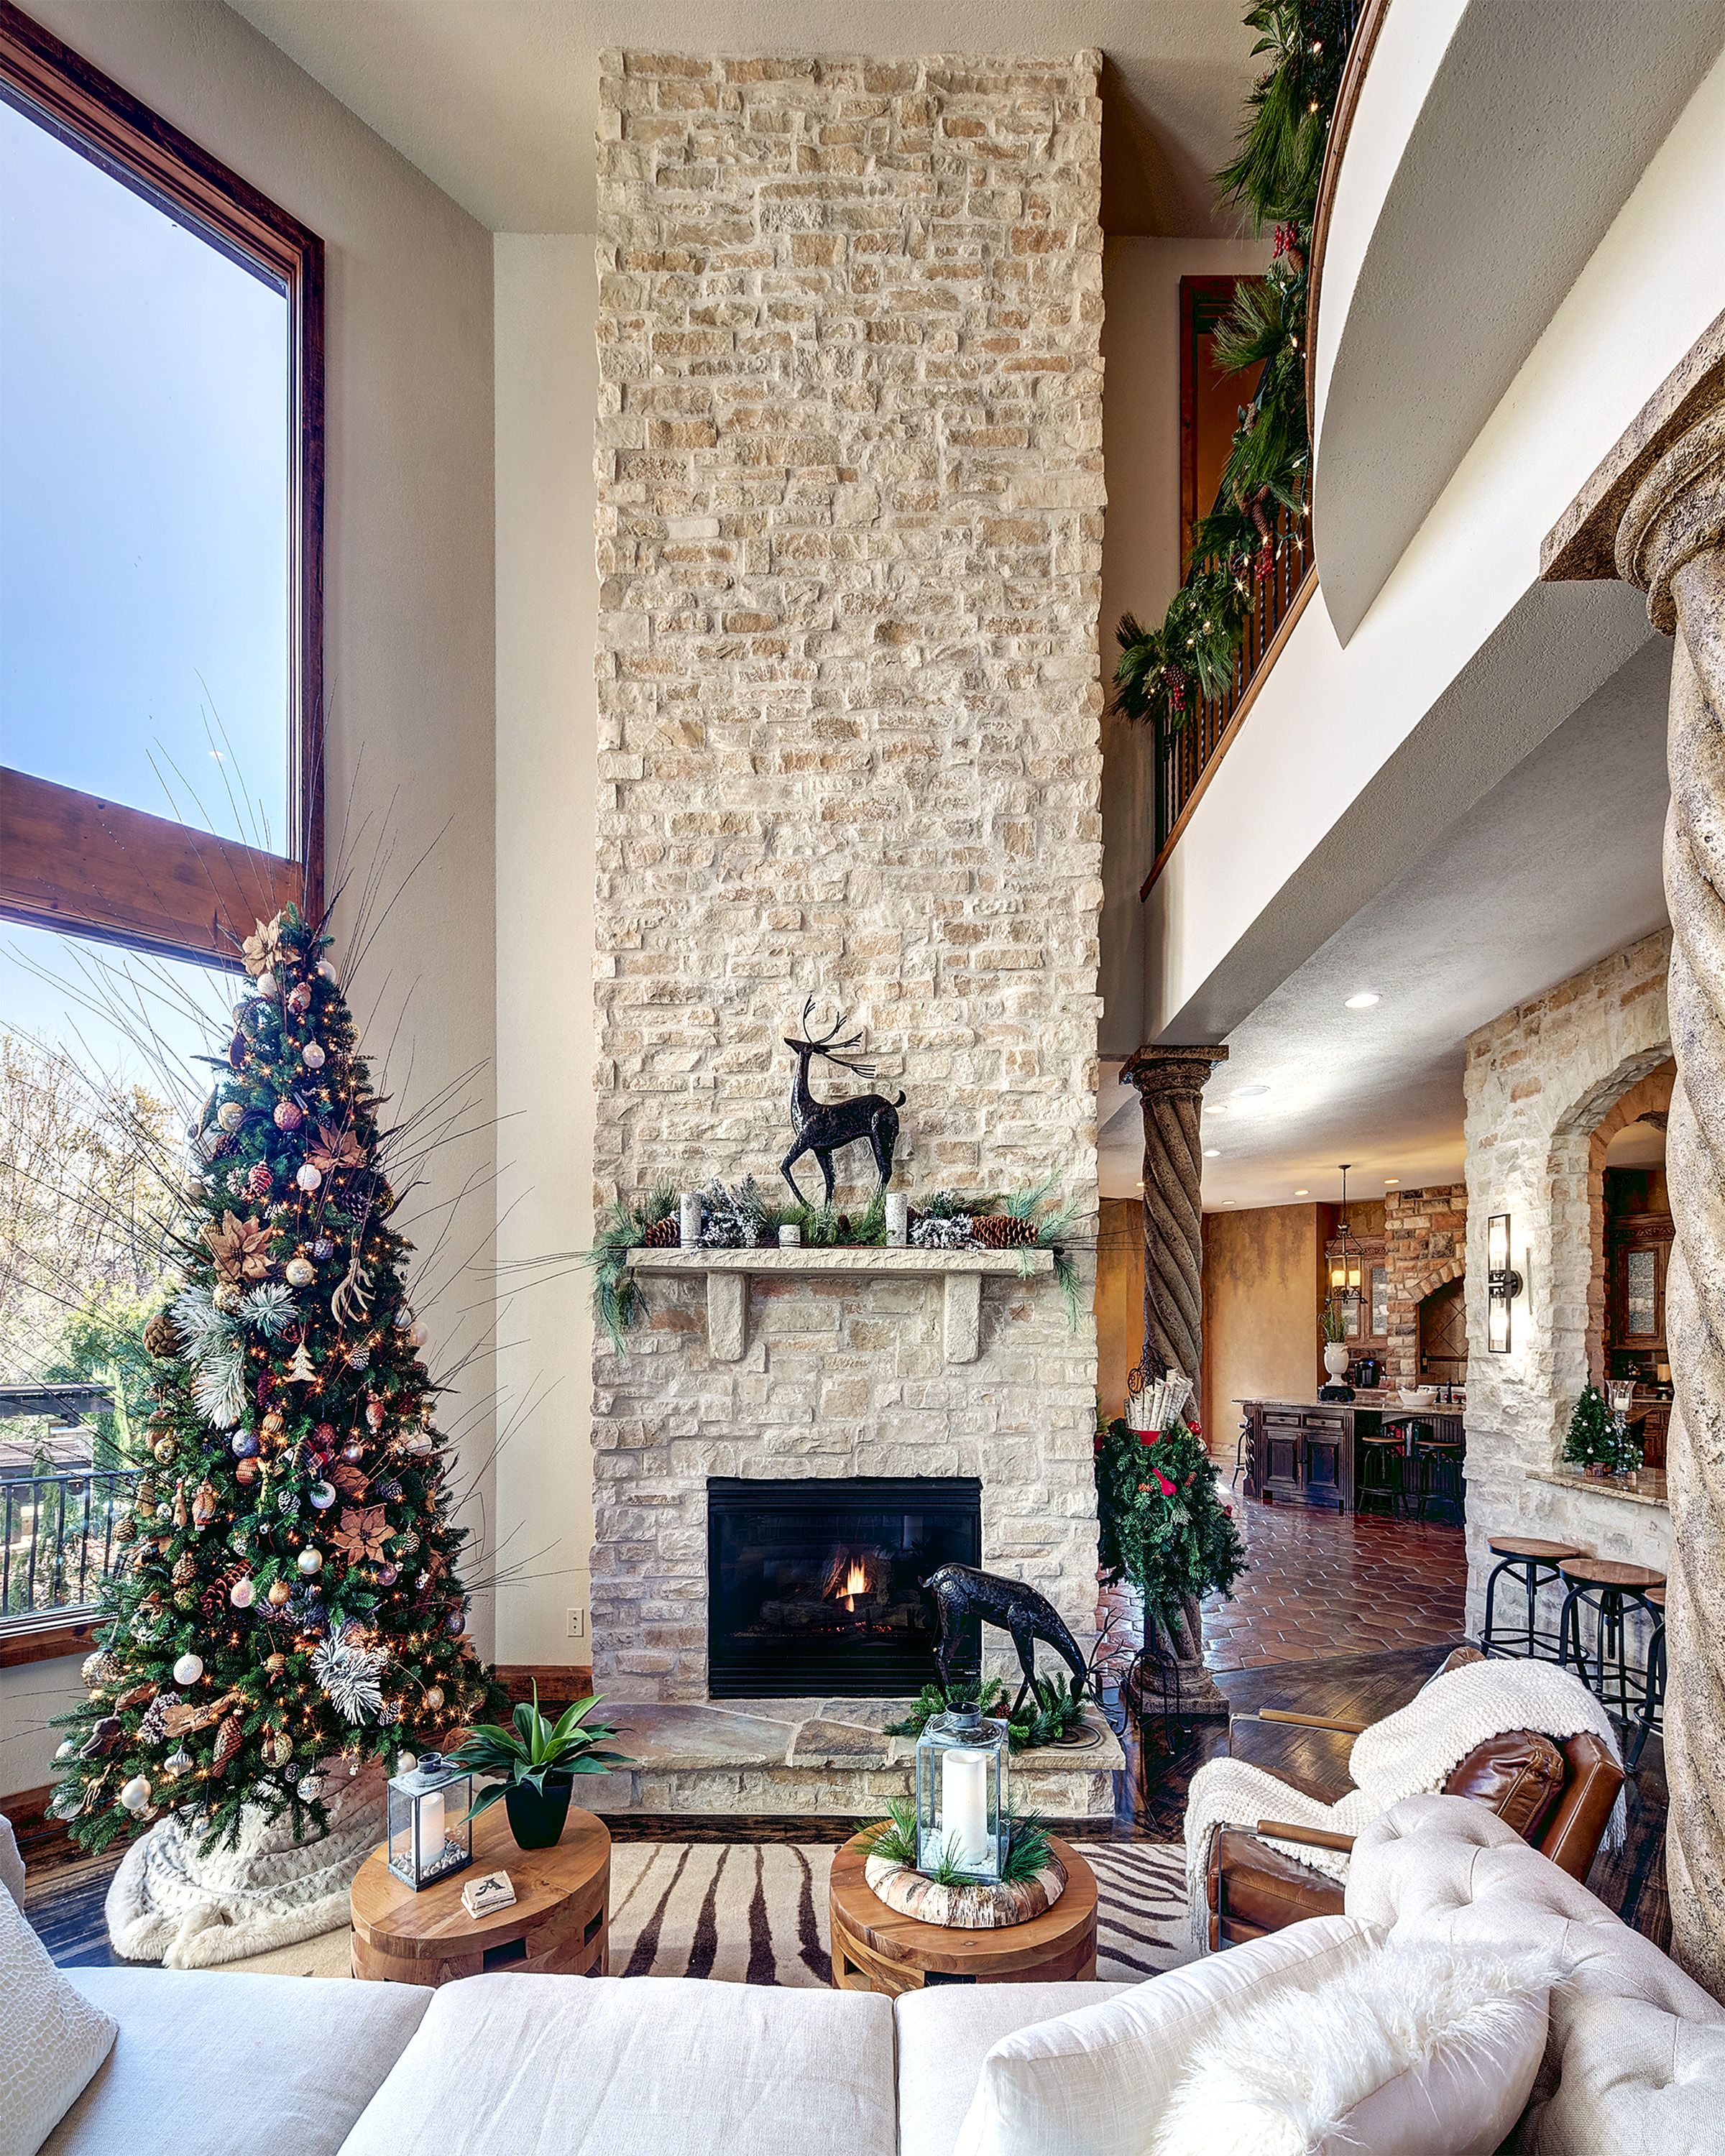 Kansas City Fireplace Inspirational Indoor Project Idea for Your Fireplace Profile Canyon